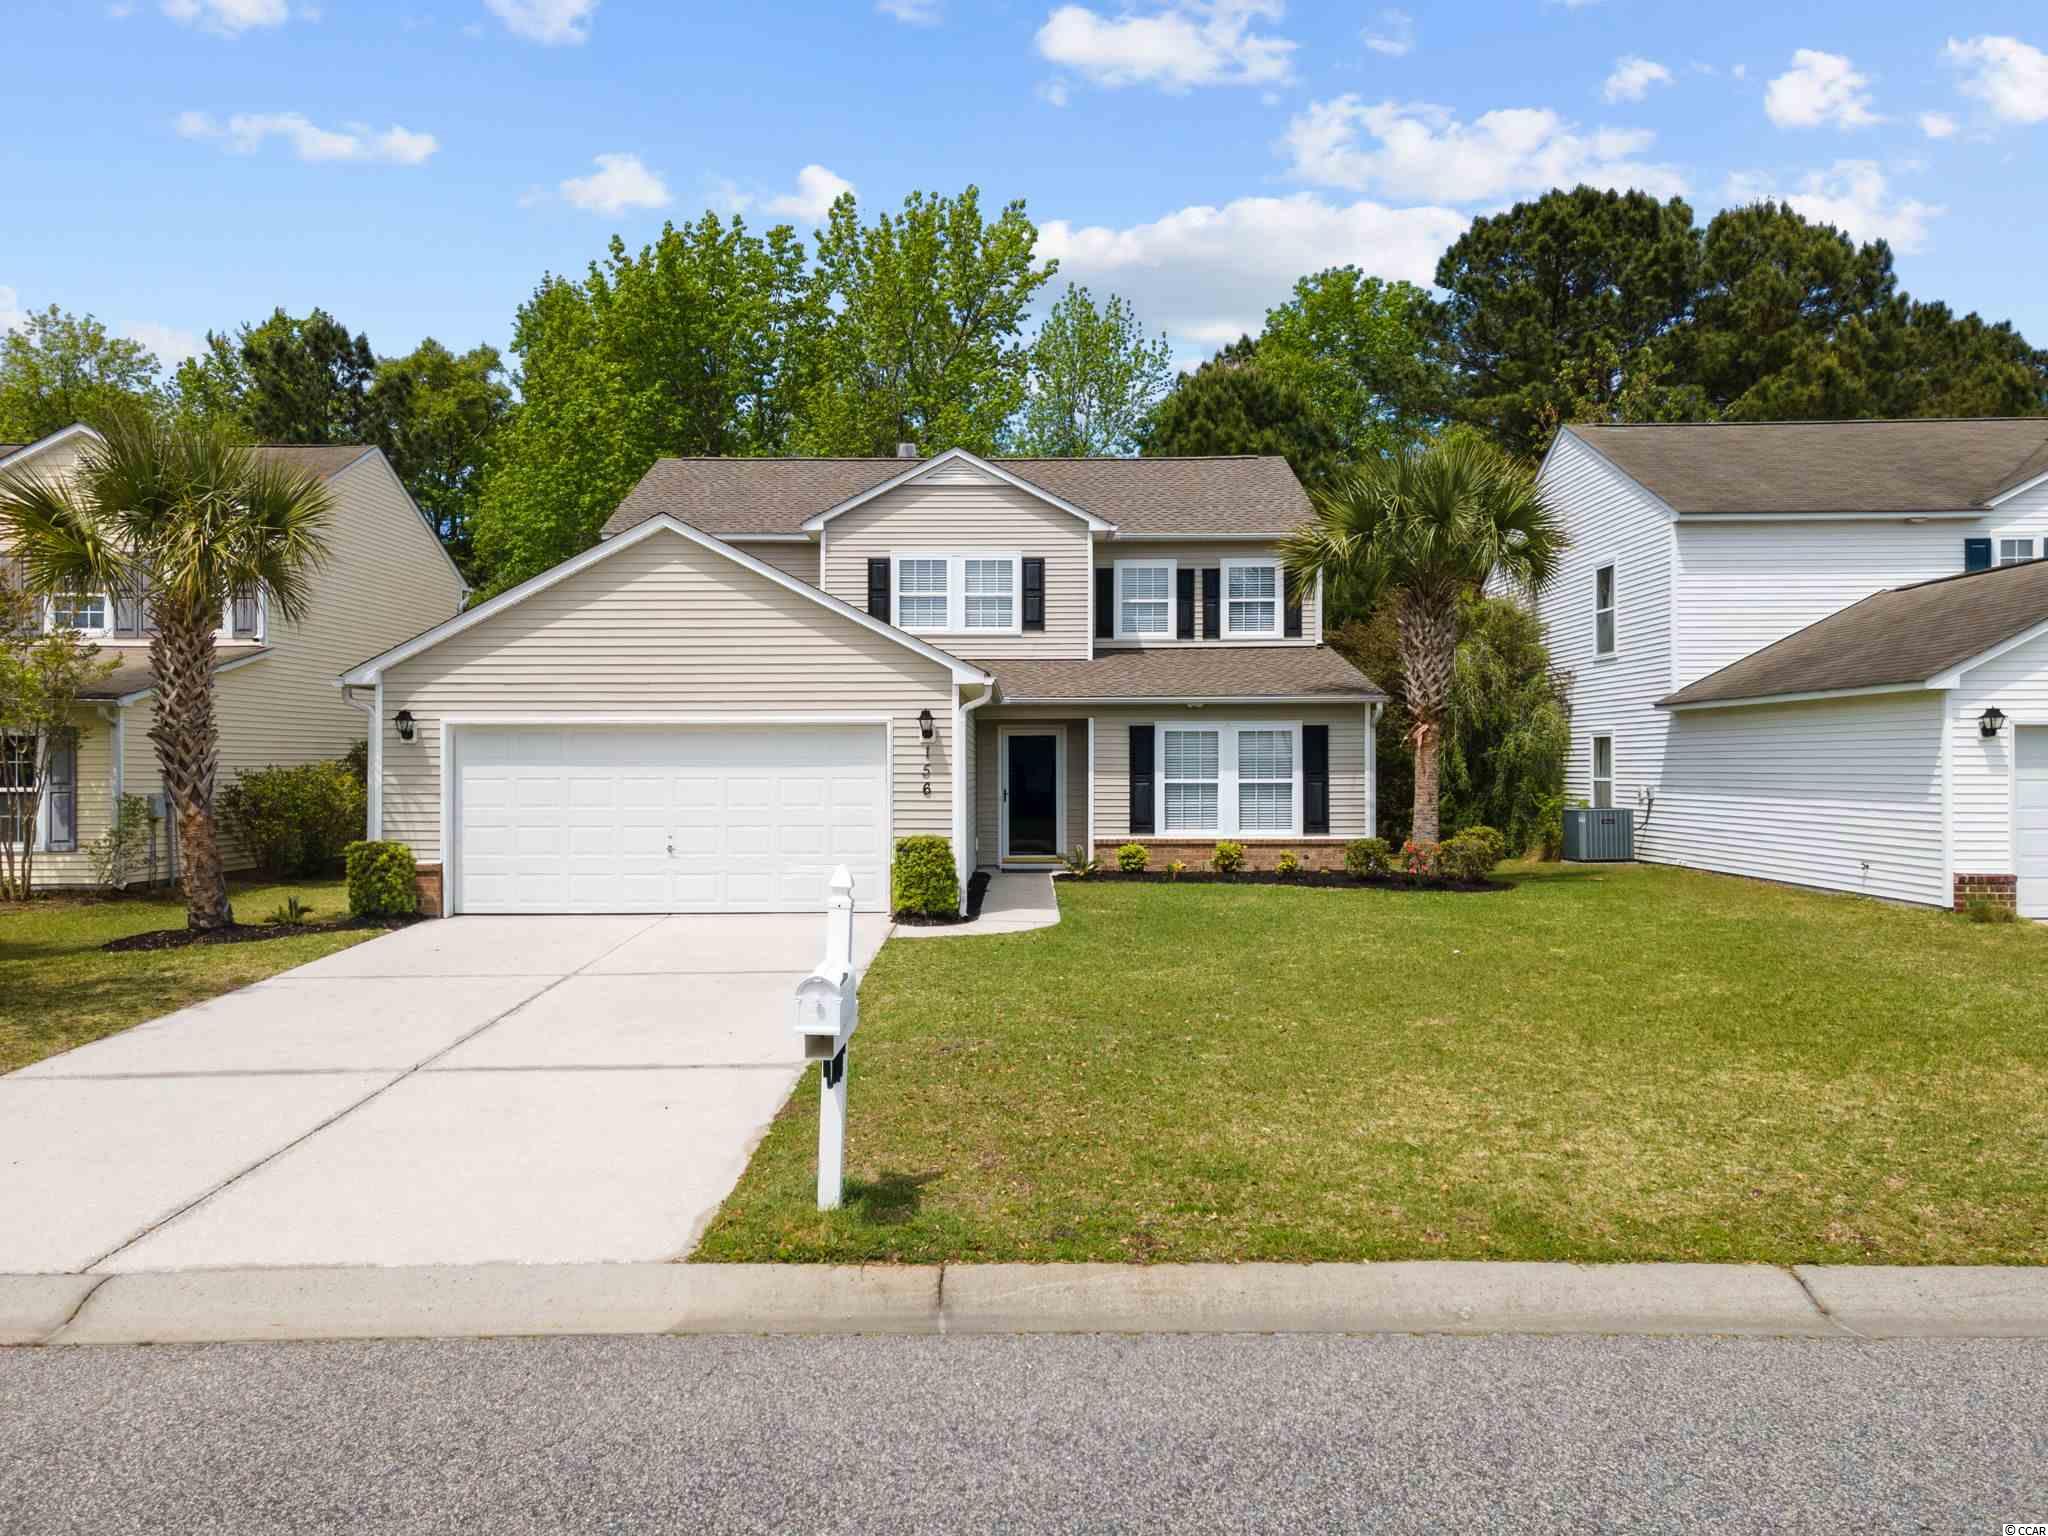 156 Weeping Willow Dr. Myrtle Beach, SC 29579